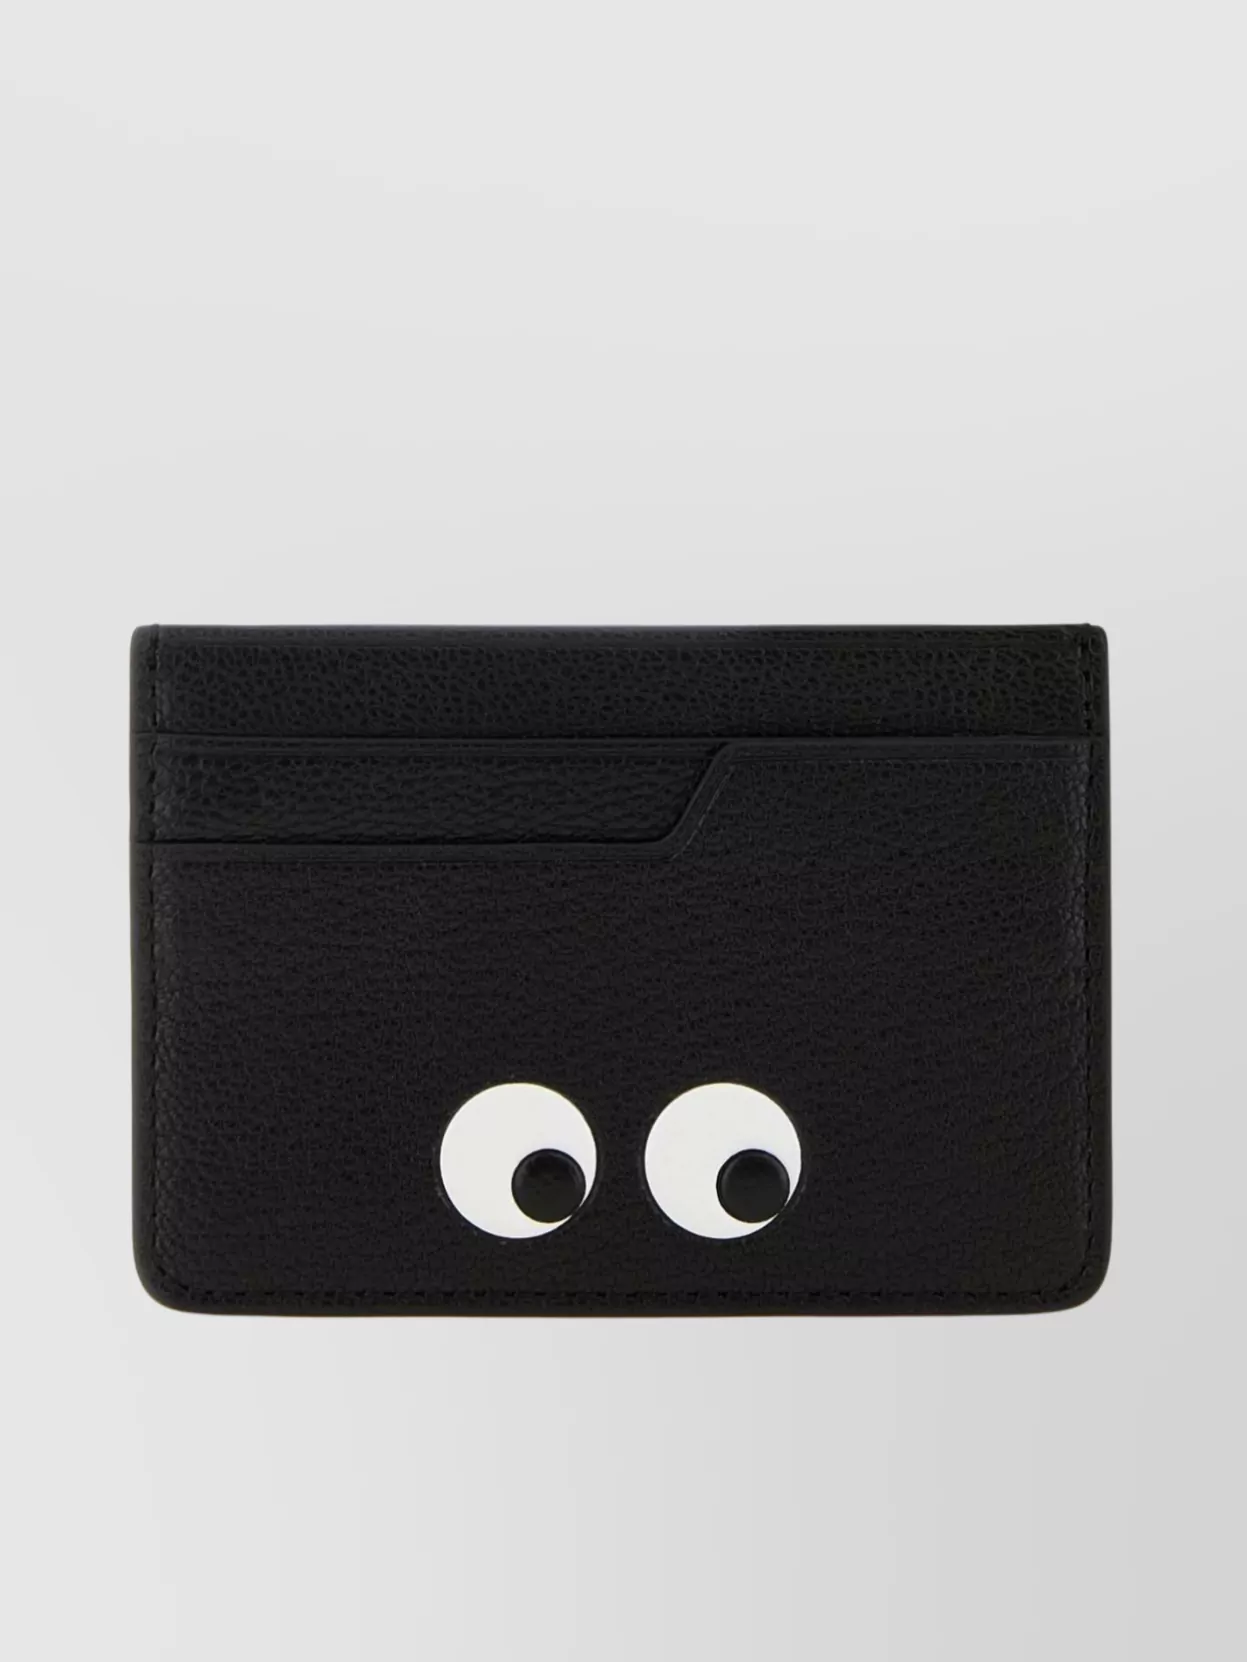 ANYA HINDMARCH EMBOSSED GRAPHIC CARD HOLDER